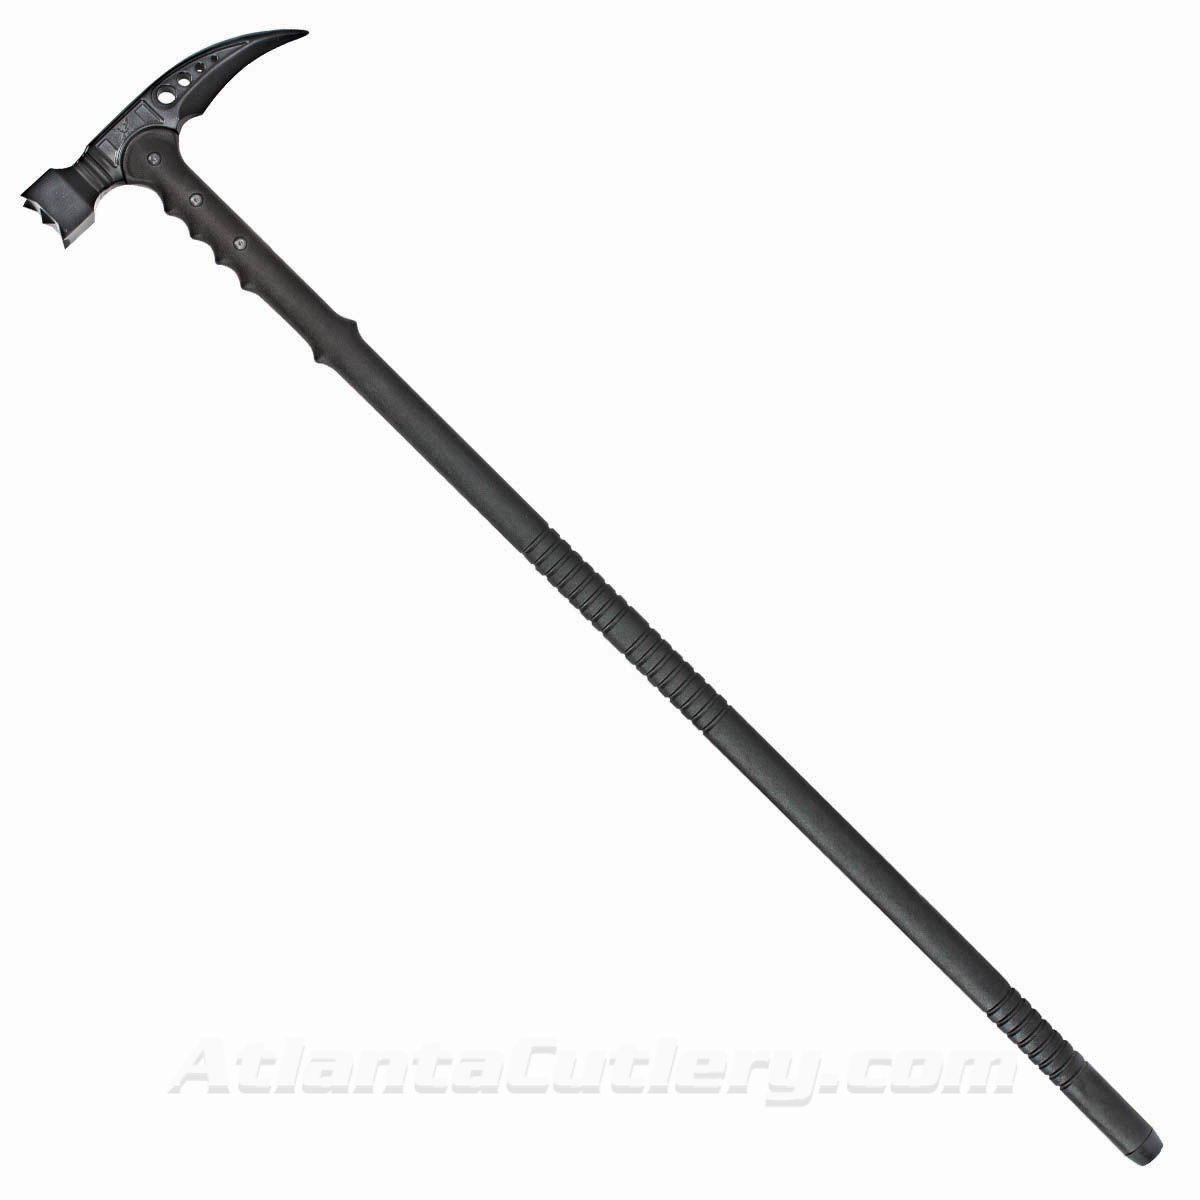 M48 Kommando Tactical Survival Hammer Staff is the perfect companion for hiking and camping